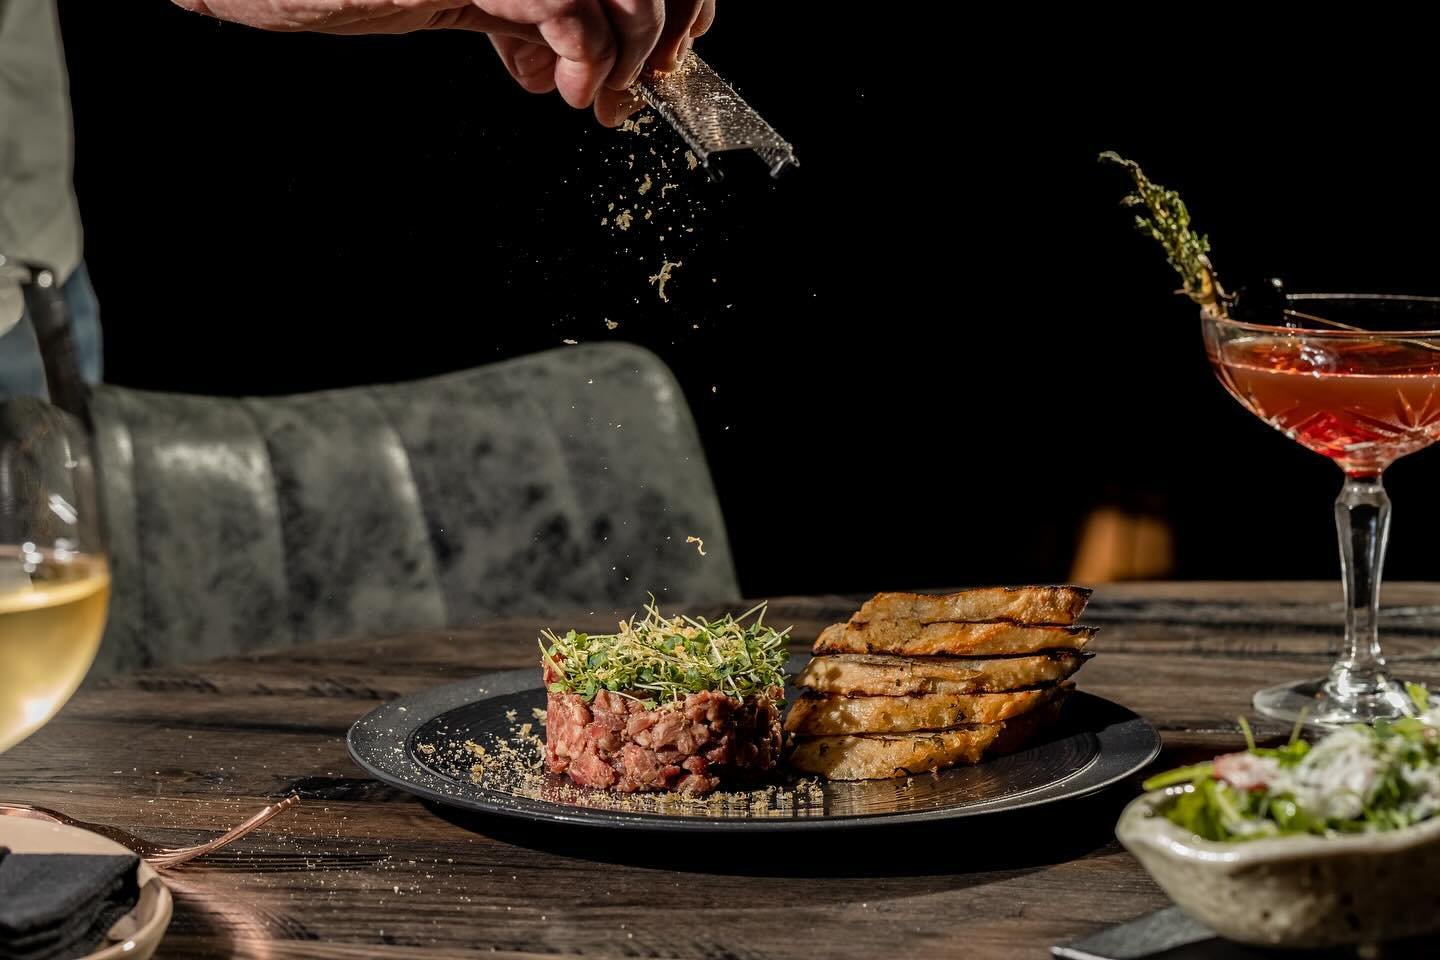 Start your dinner off right with our Wagyu Tartare, made with the finest Texas Filet Mignon and Ribeye, finished off with a Balsamic Cured Egg.